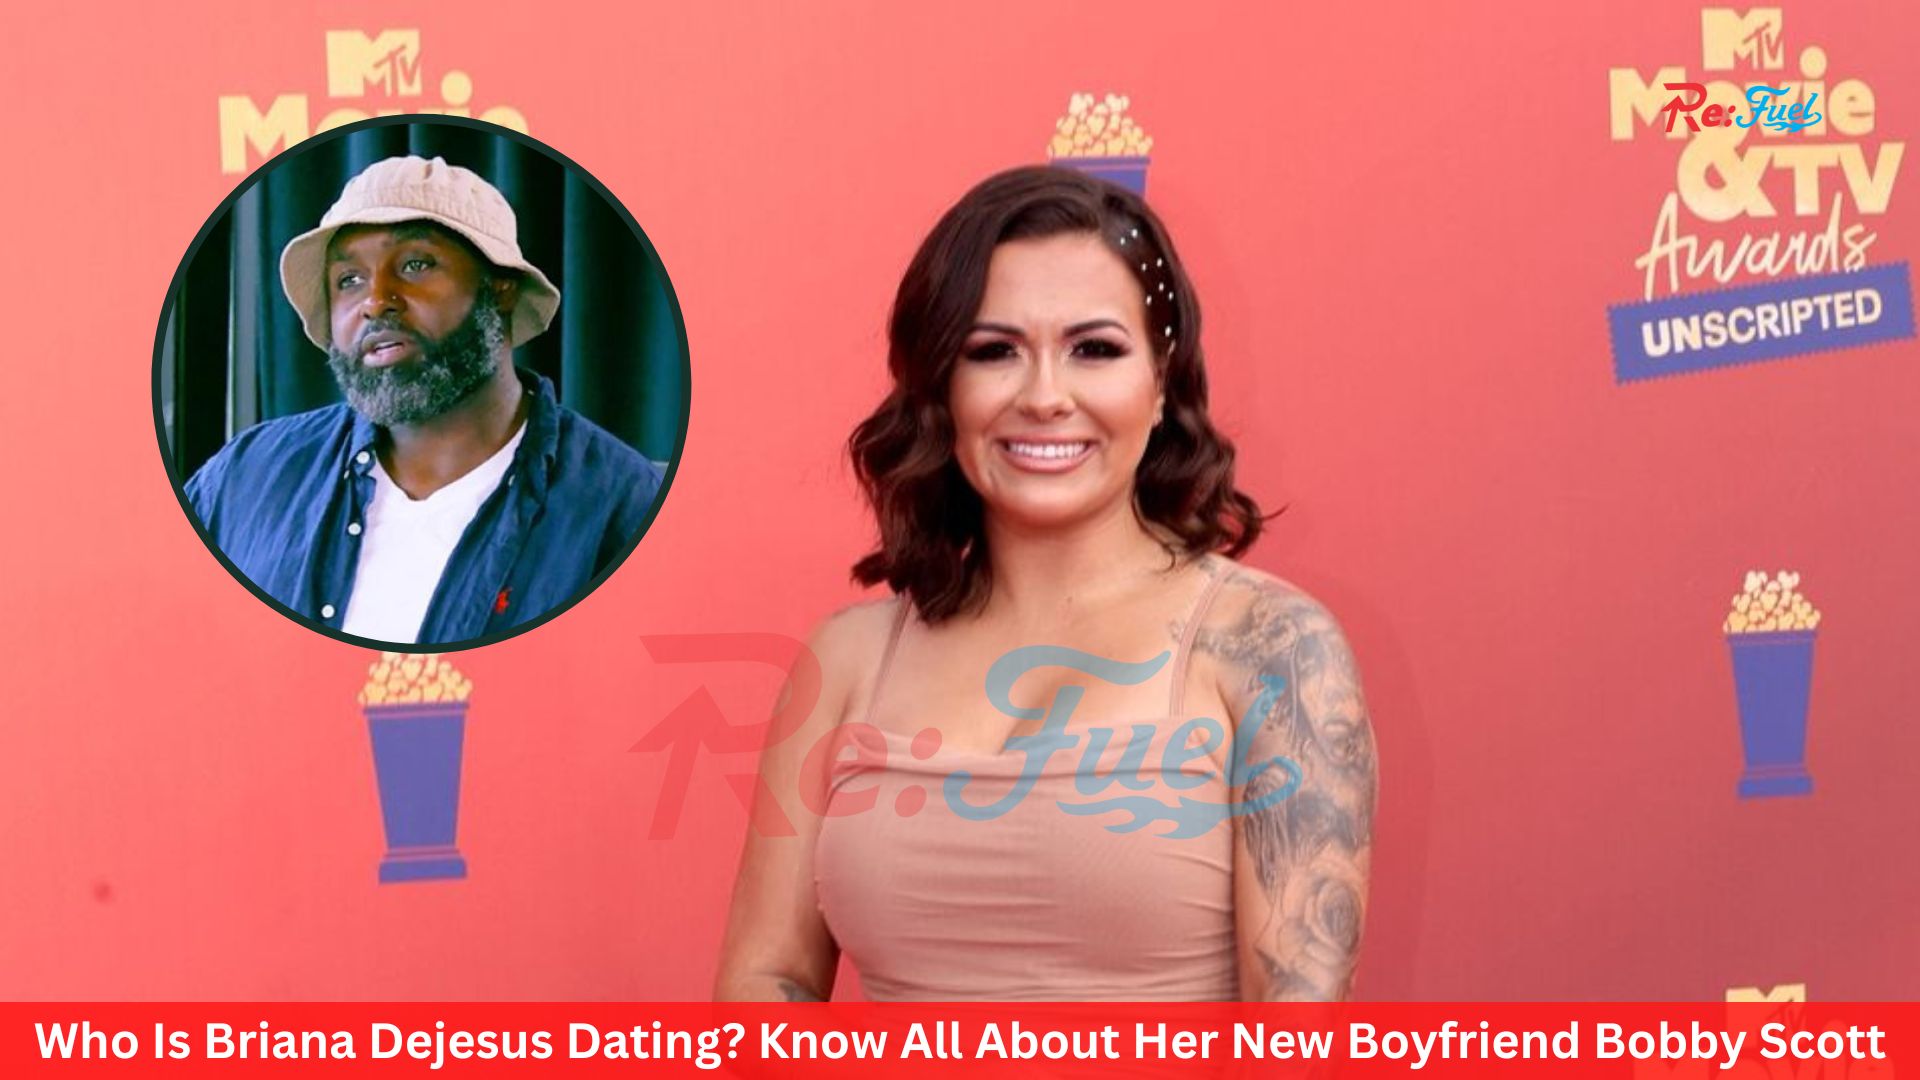 Who Is Briana Dejesus Dating? Know All About Her New Boyfriend Bobby Scott